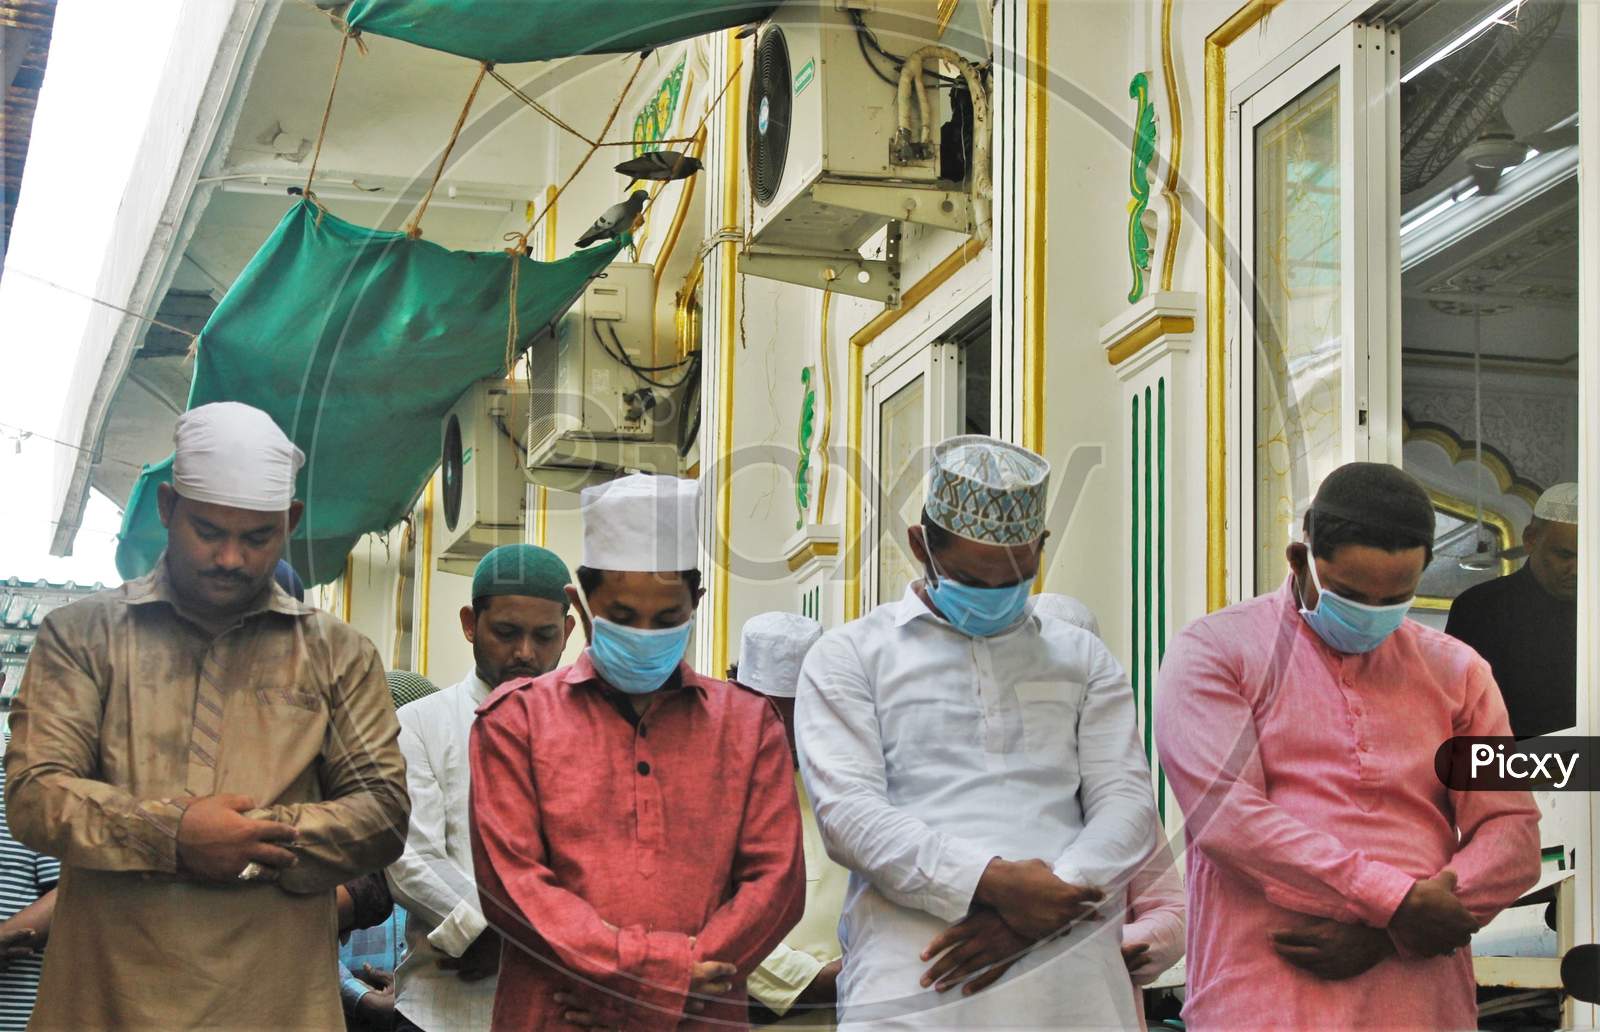 Muslims wearing protective masks attend Friday prayers at a mosque amid concerns about the spread of coronavirus disease (COVID-19), in Mumbai, India, March 20, 2020.